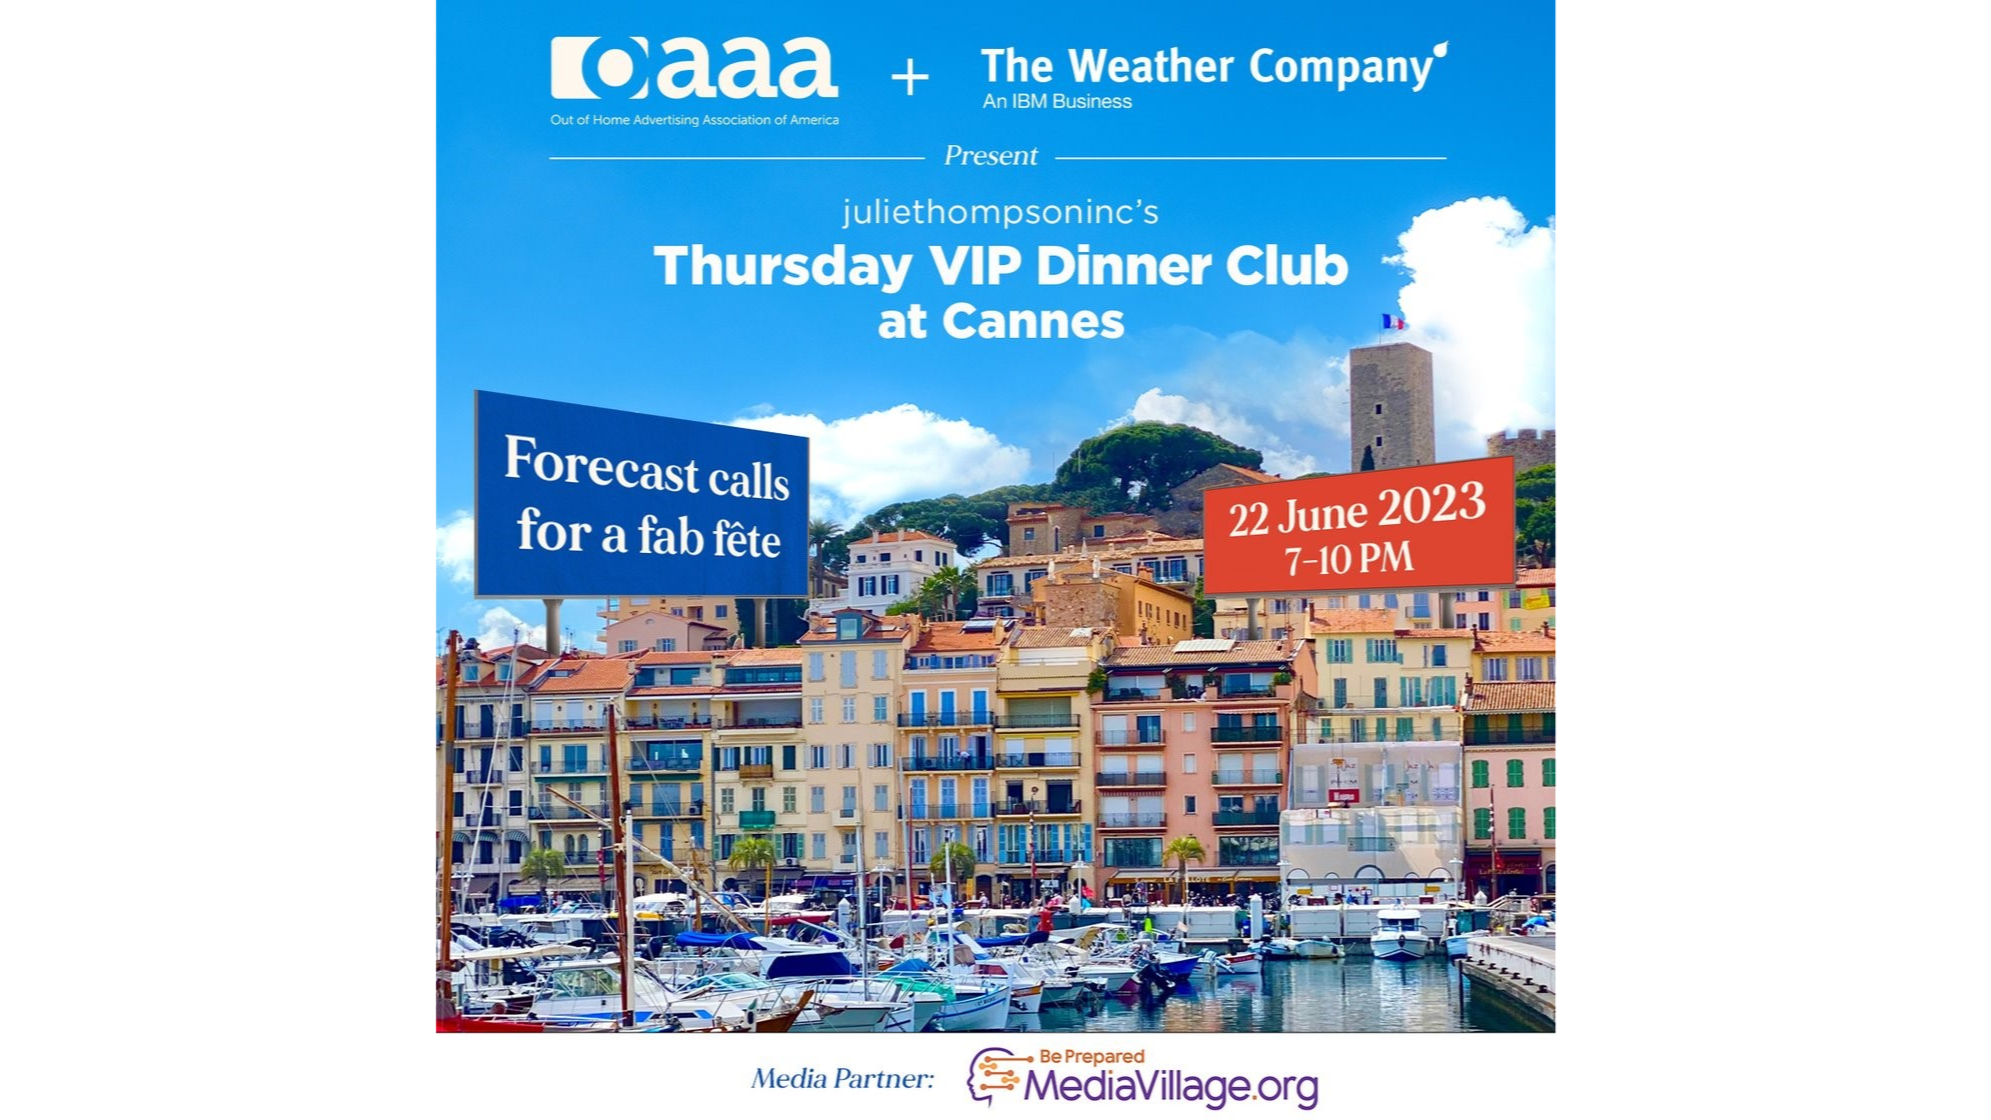 Cover image for  article: "juliethompsoninc's Thursday VIP Dinner Club at Cannes" Welcomes MediaVillage as Media Partner